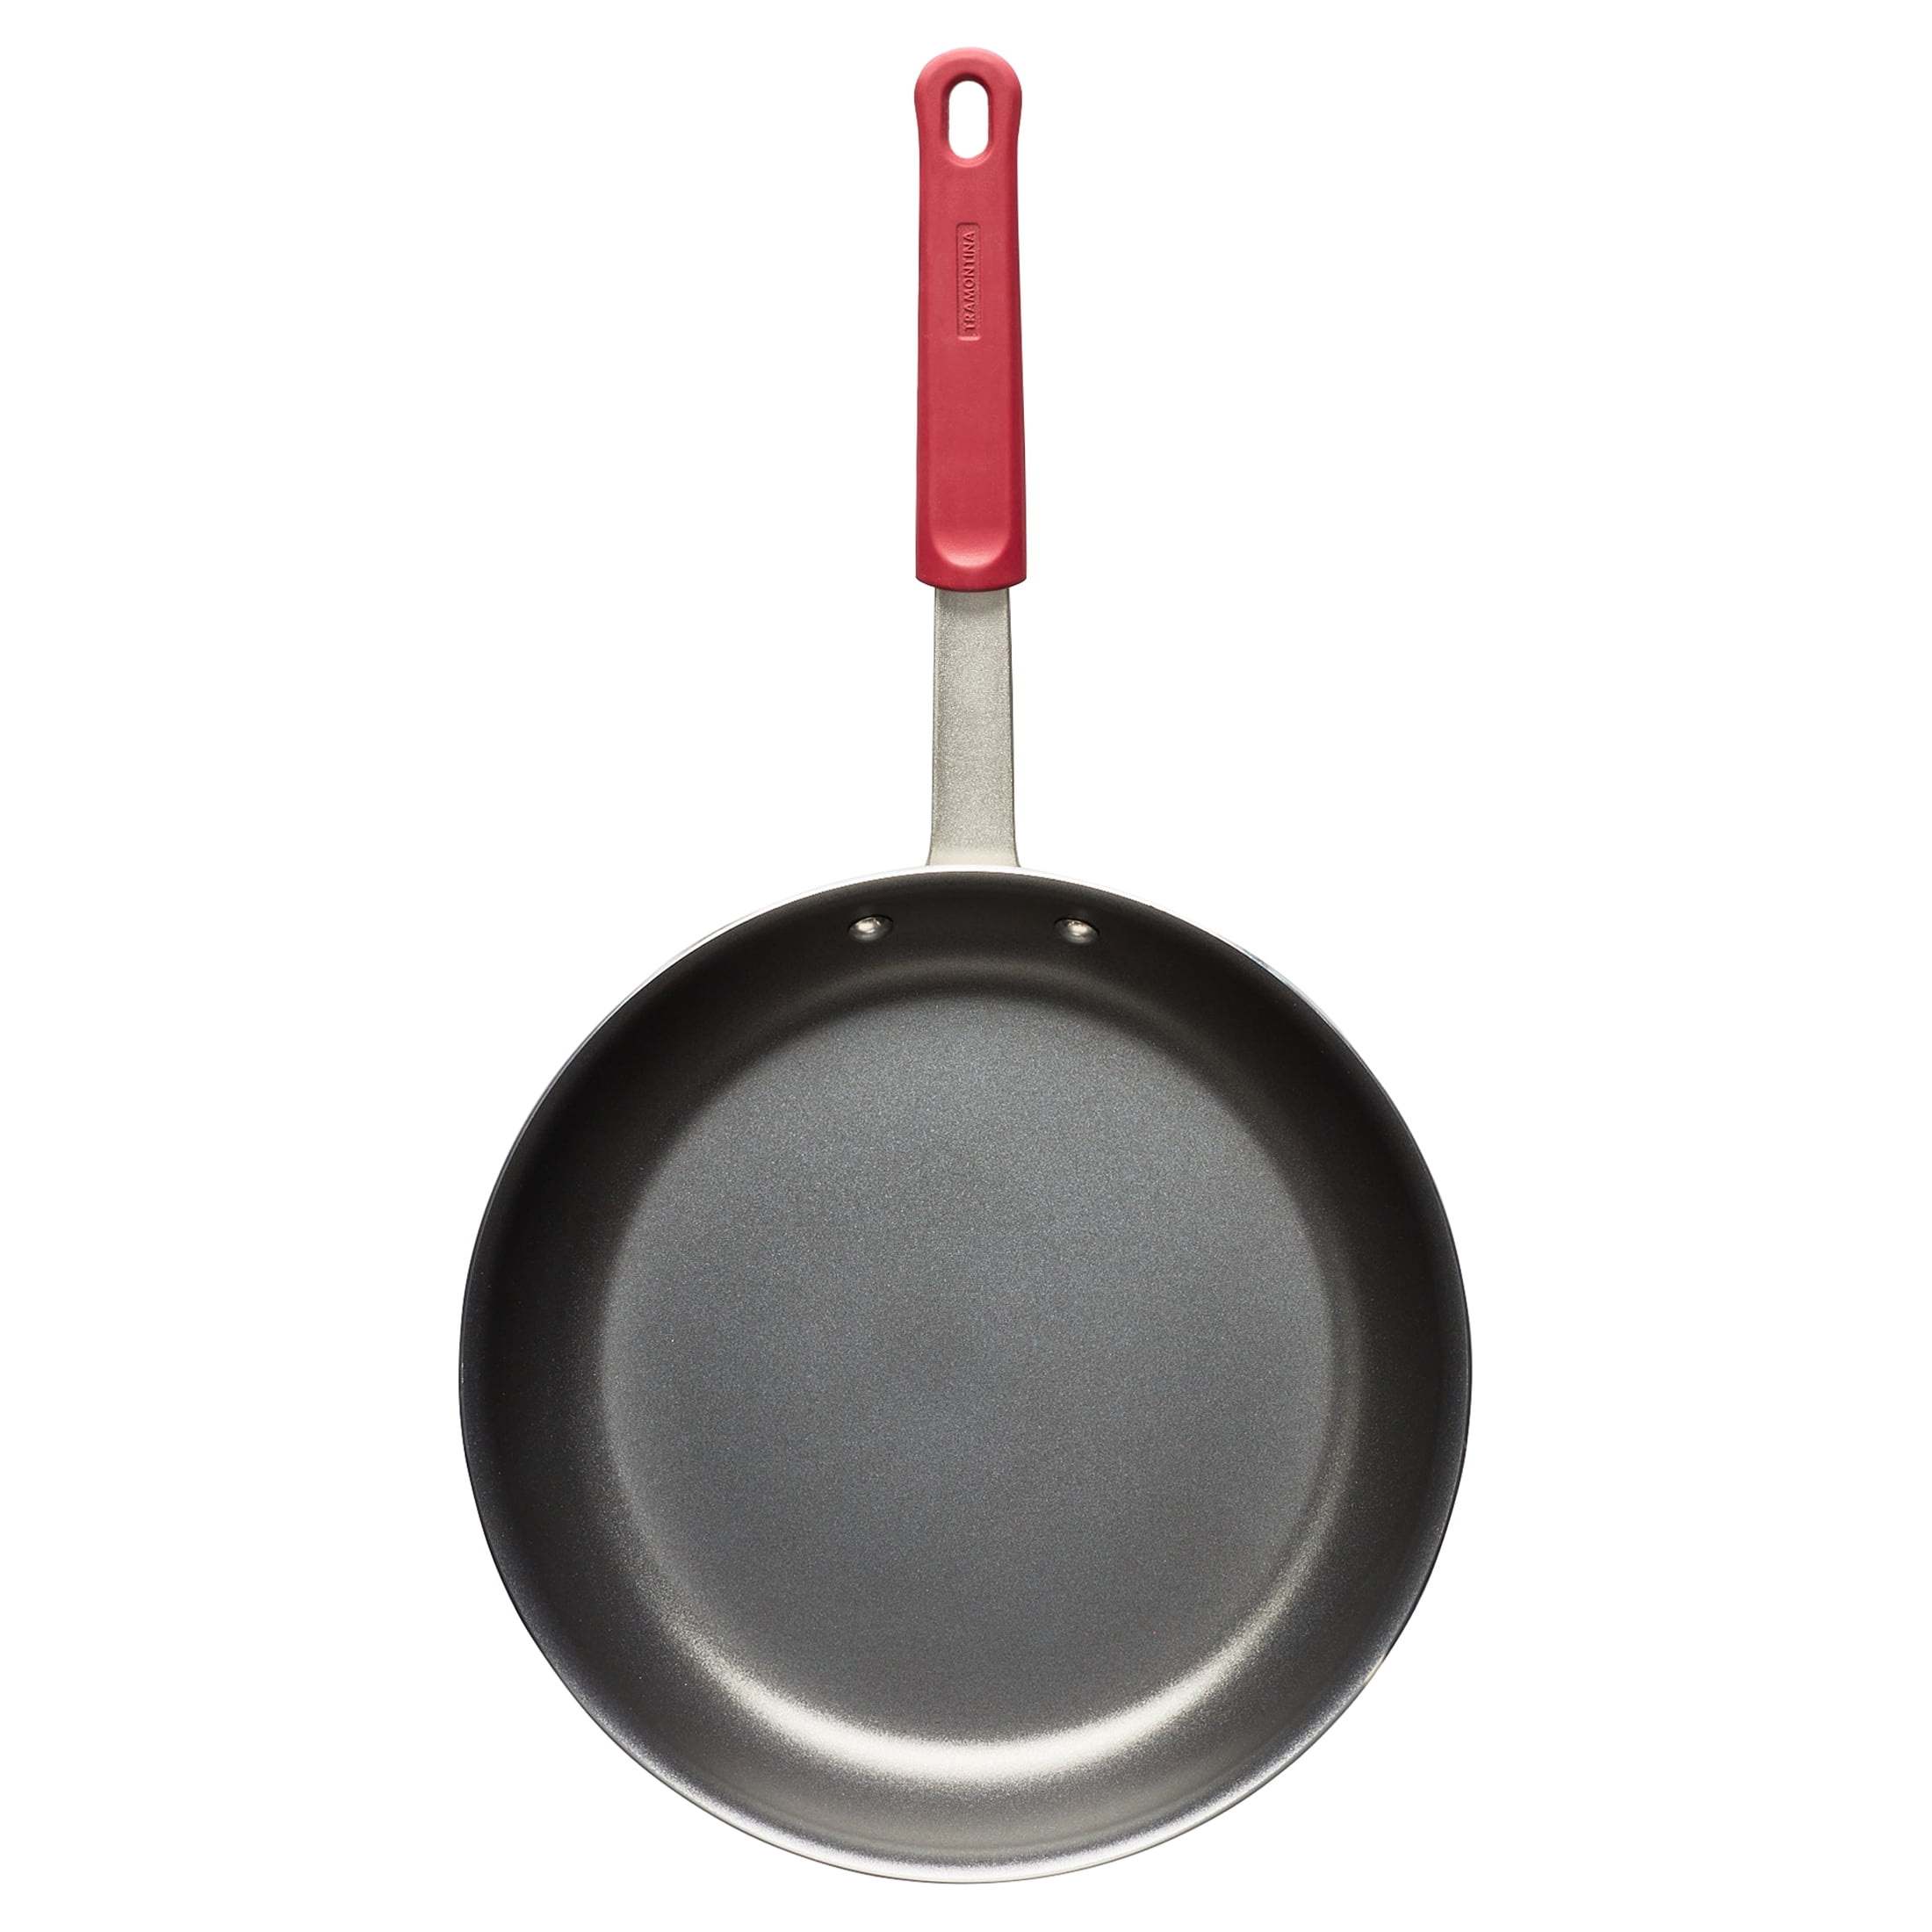 Tramontina Allegra Stainless Steel Frying Pan with Triple Bottom 24 cm 2.1 L 62666240